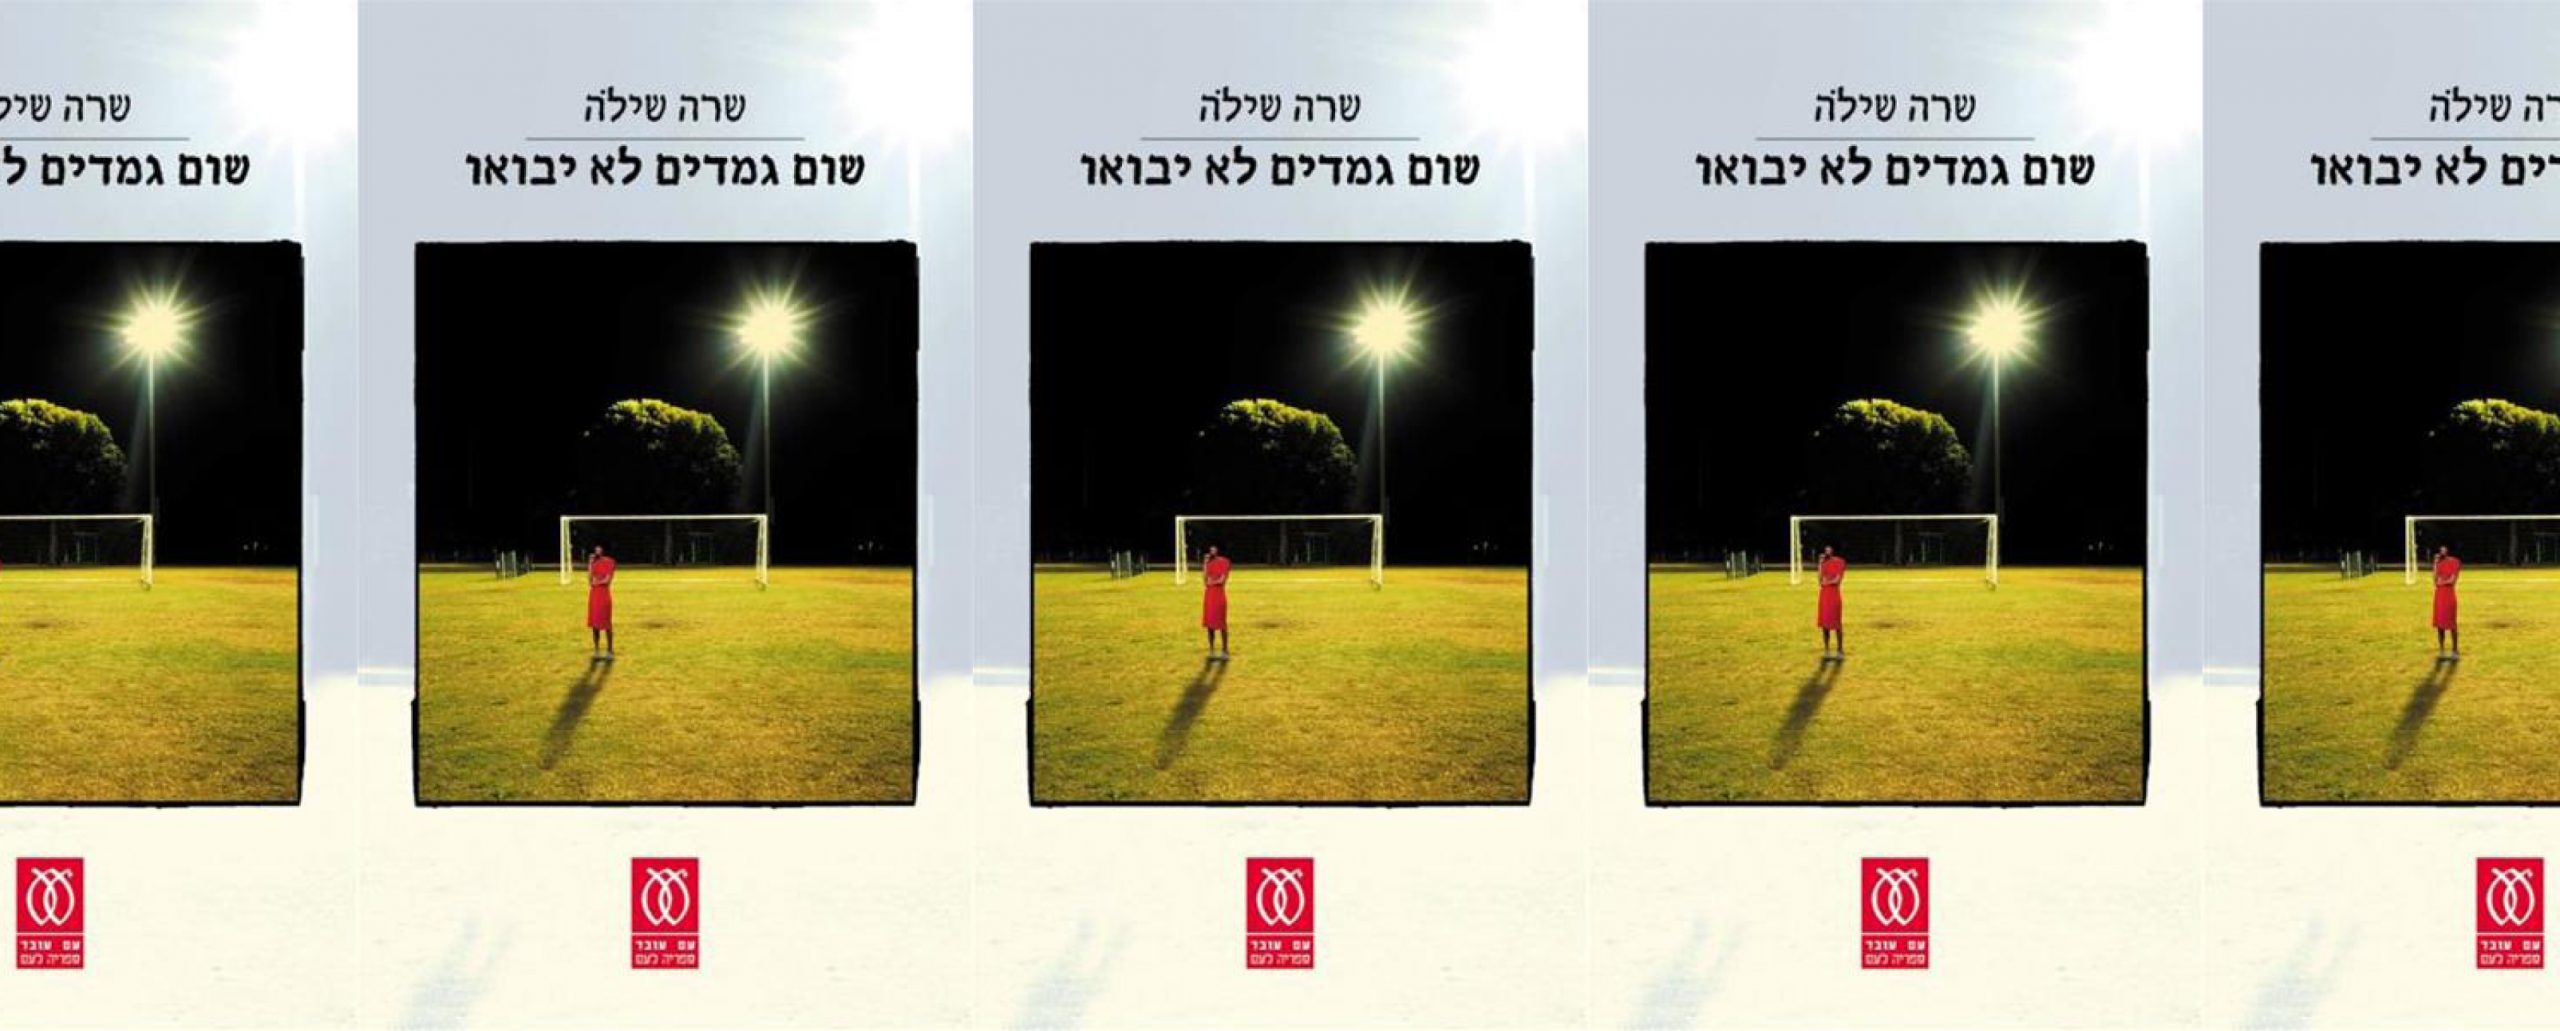 the book cover for Gnomes, featuring a person standing on a soccer field at night